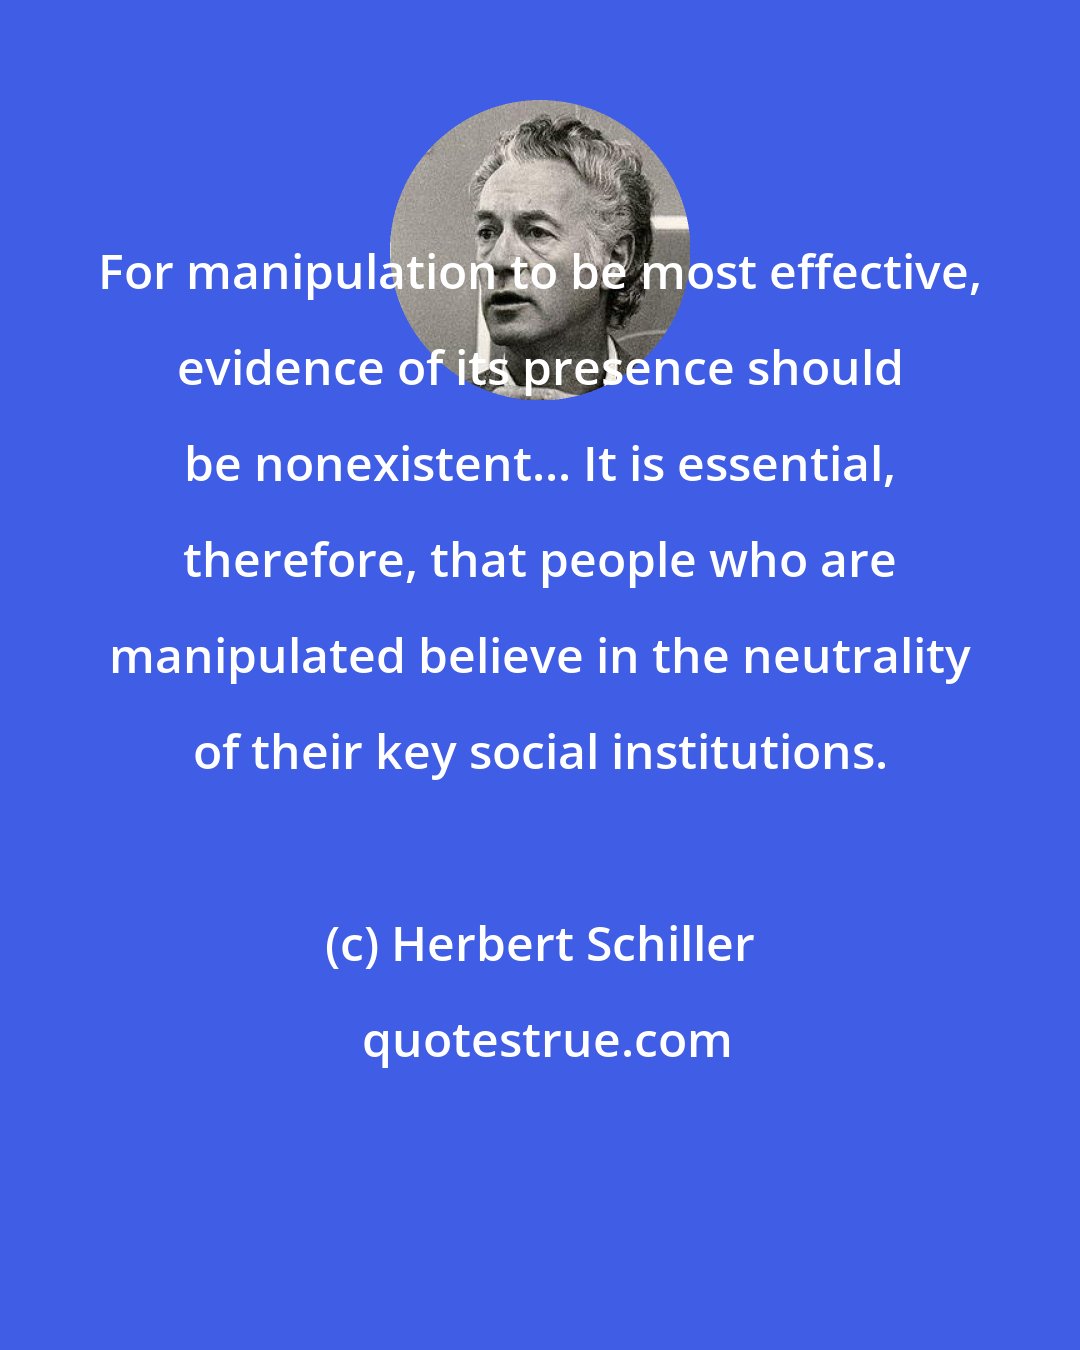 Herbert Schiller: For manipulation to be most effective, evidence of its presence should be nonexistent... It is essential, therefore, that people who are manipulated believe in the neutrality of their key social institutions.